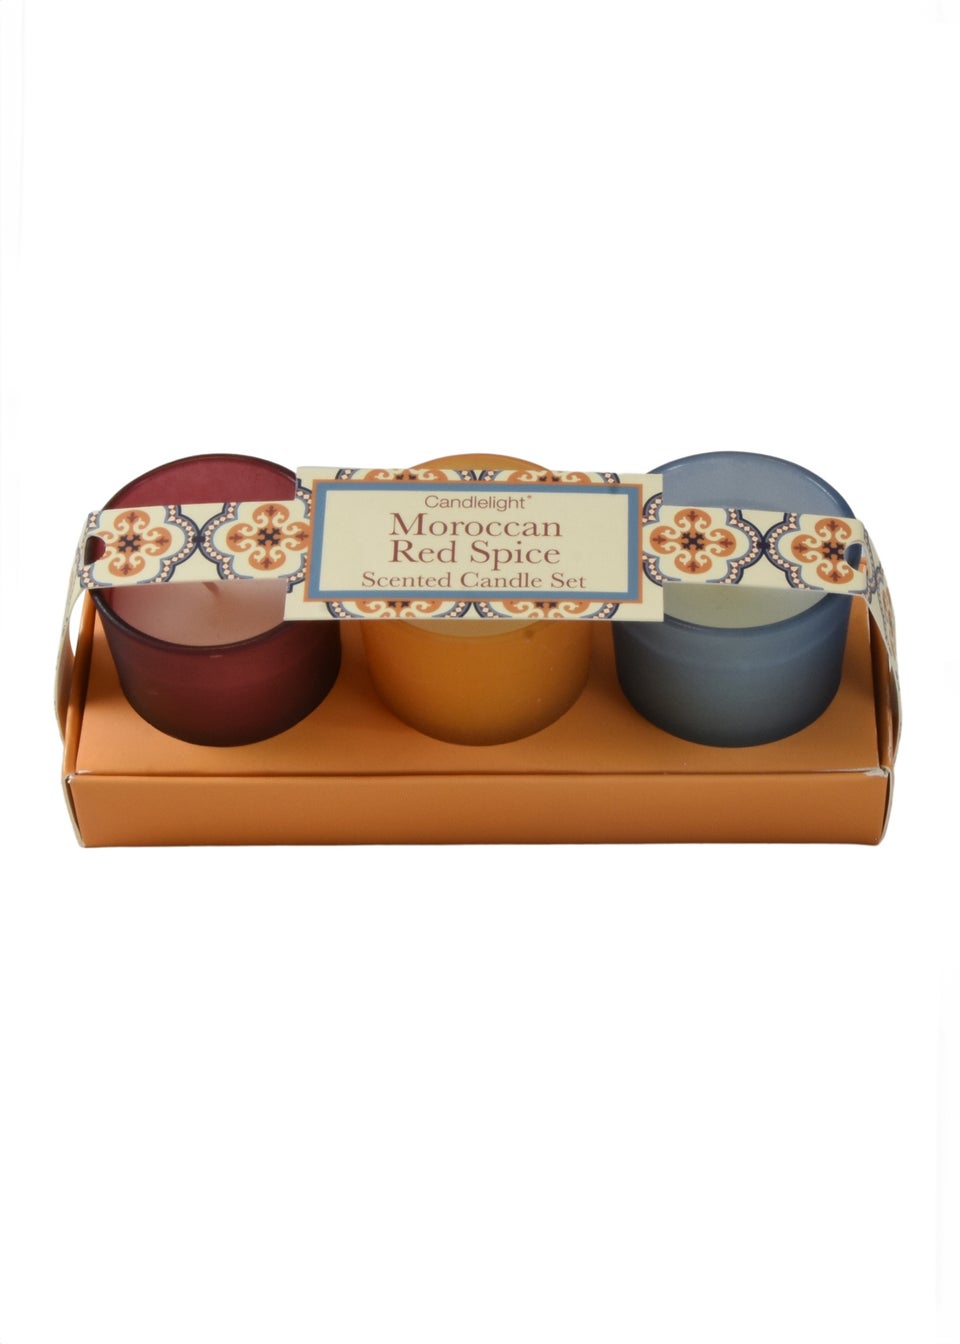 Candlelight 3 Pack Moroccan Red Spice Scented Candle Set